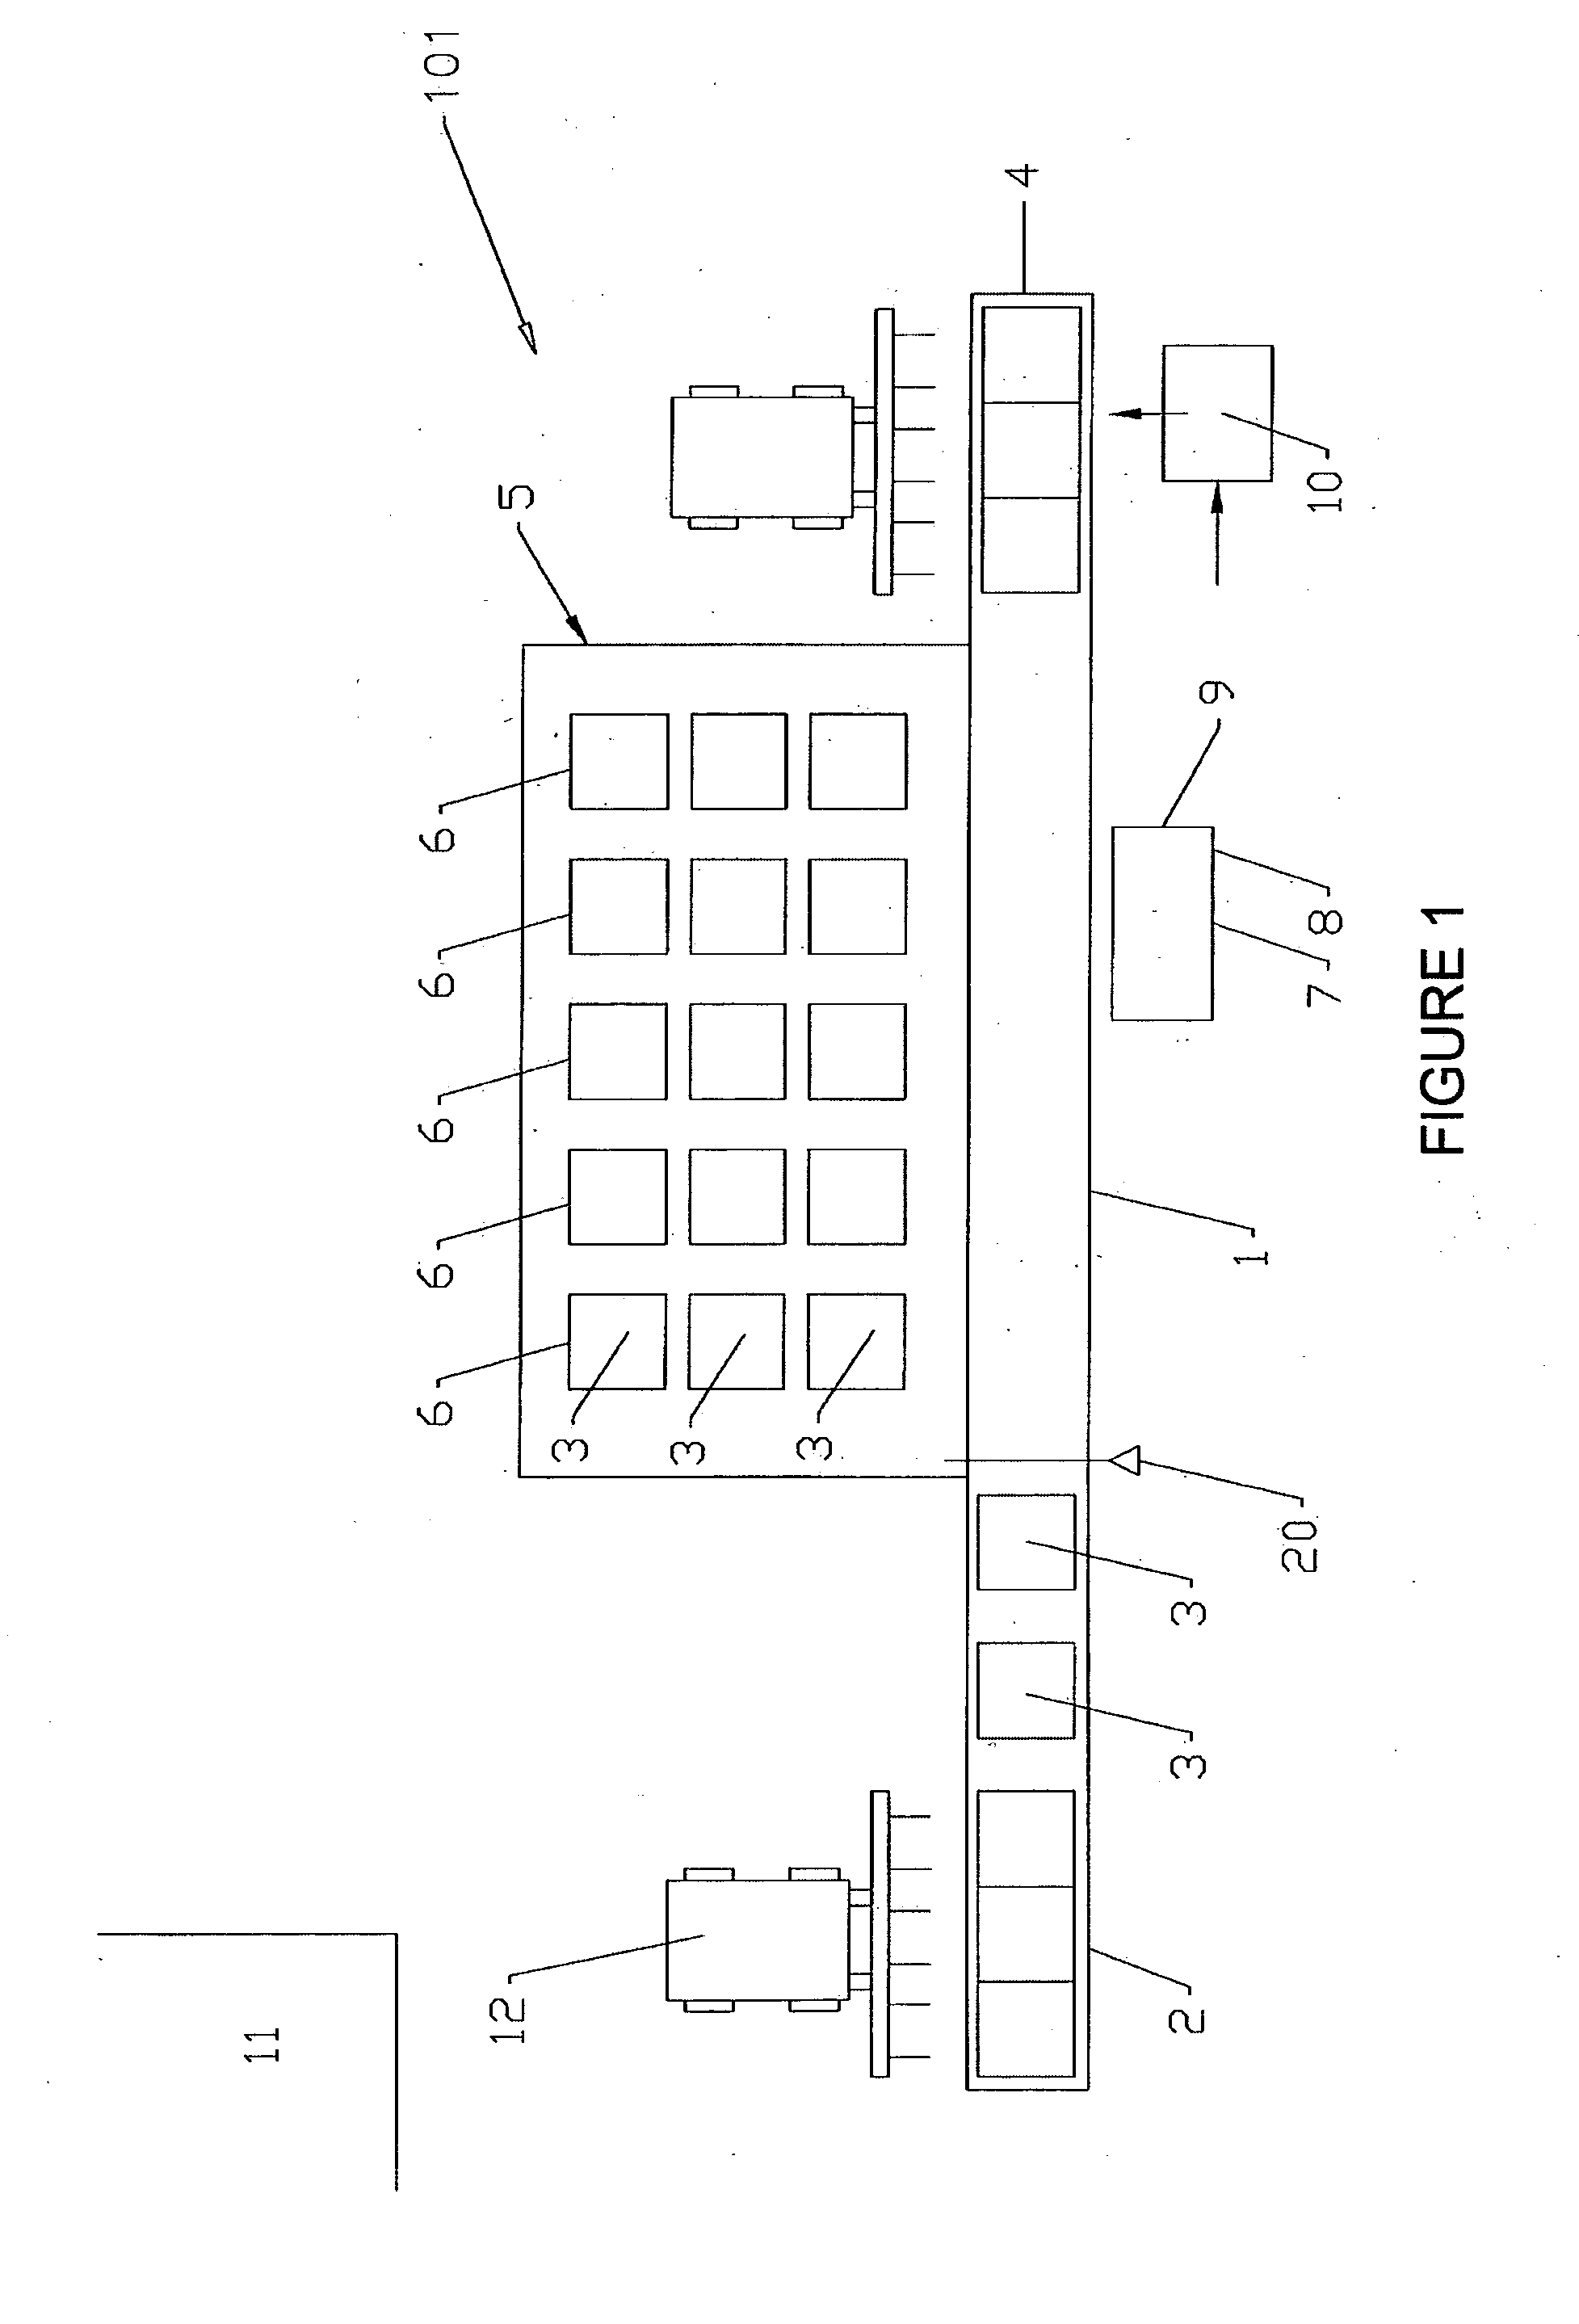 Container storage and retrieval system and method